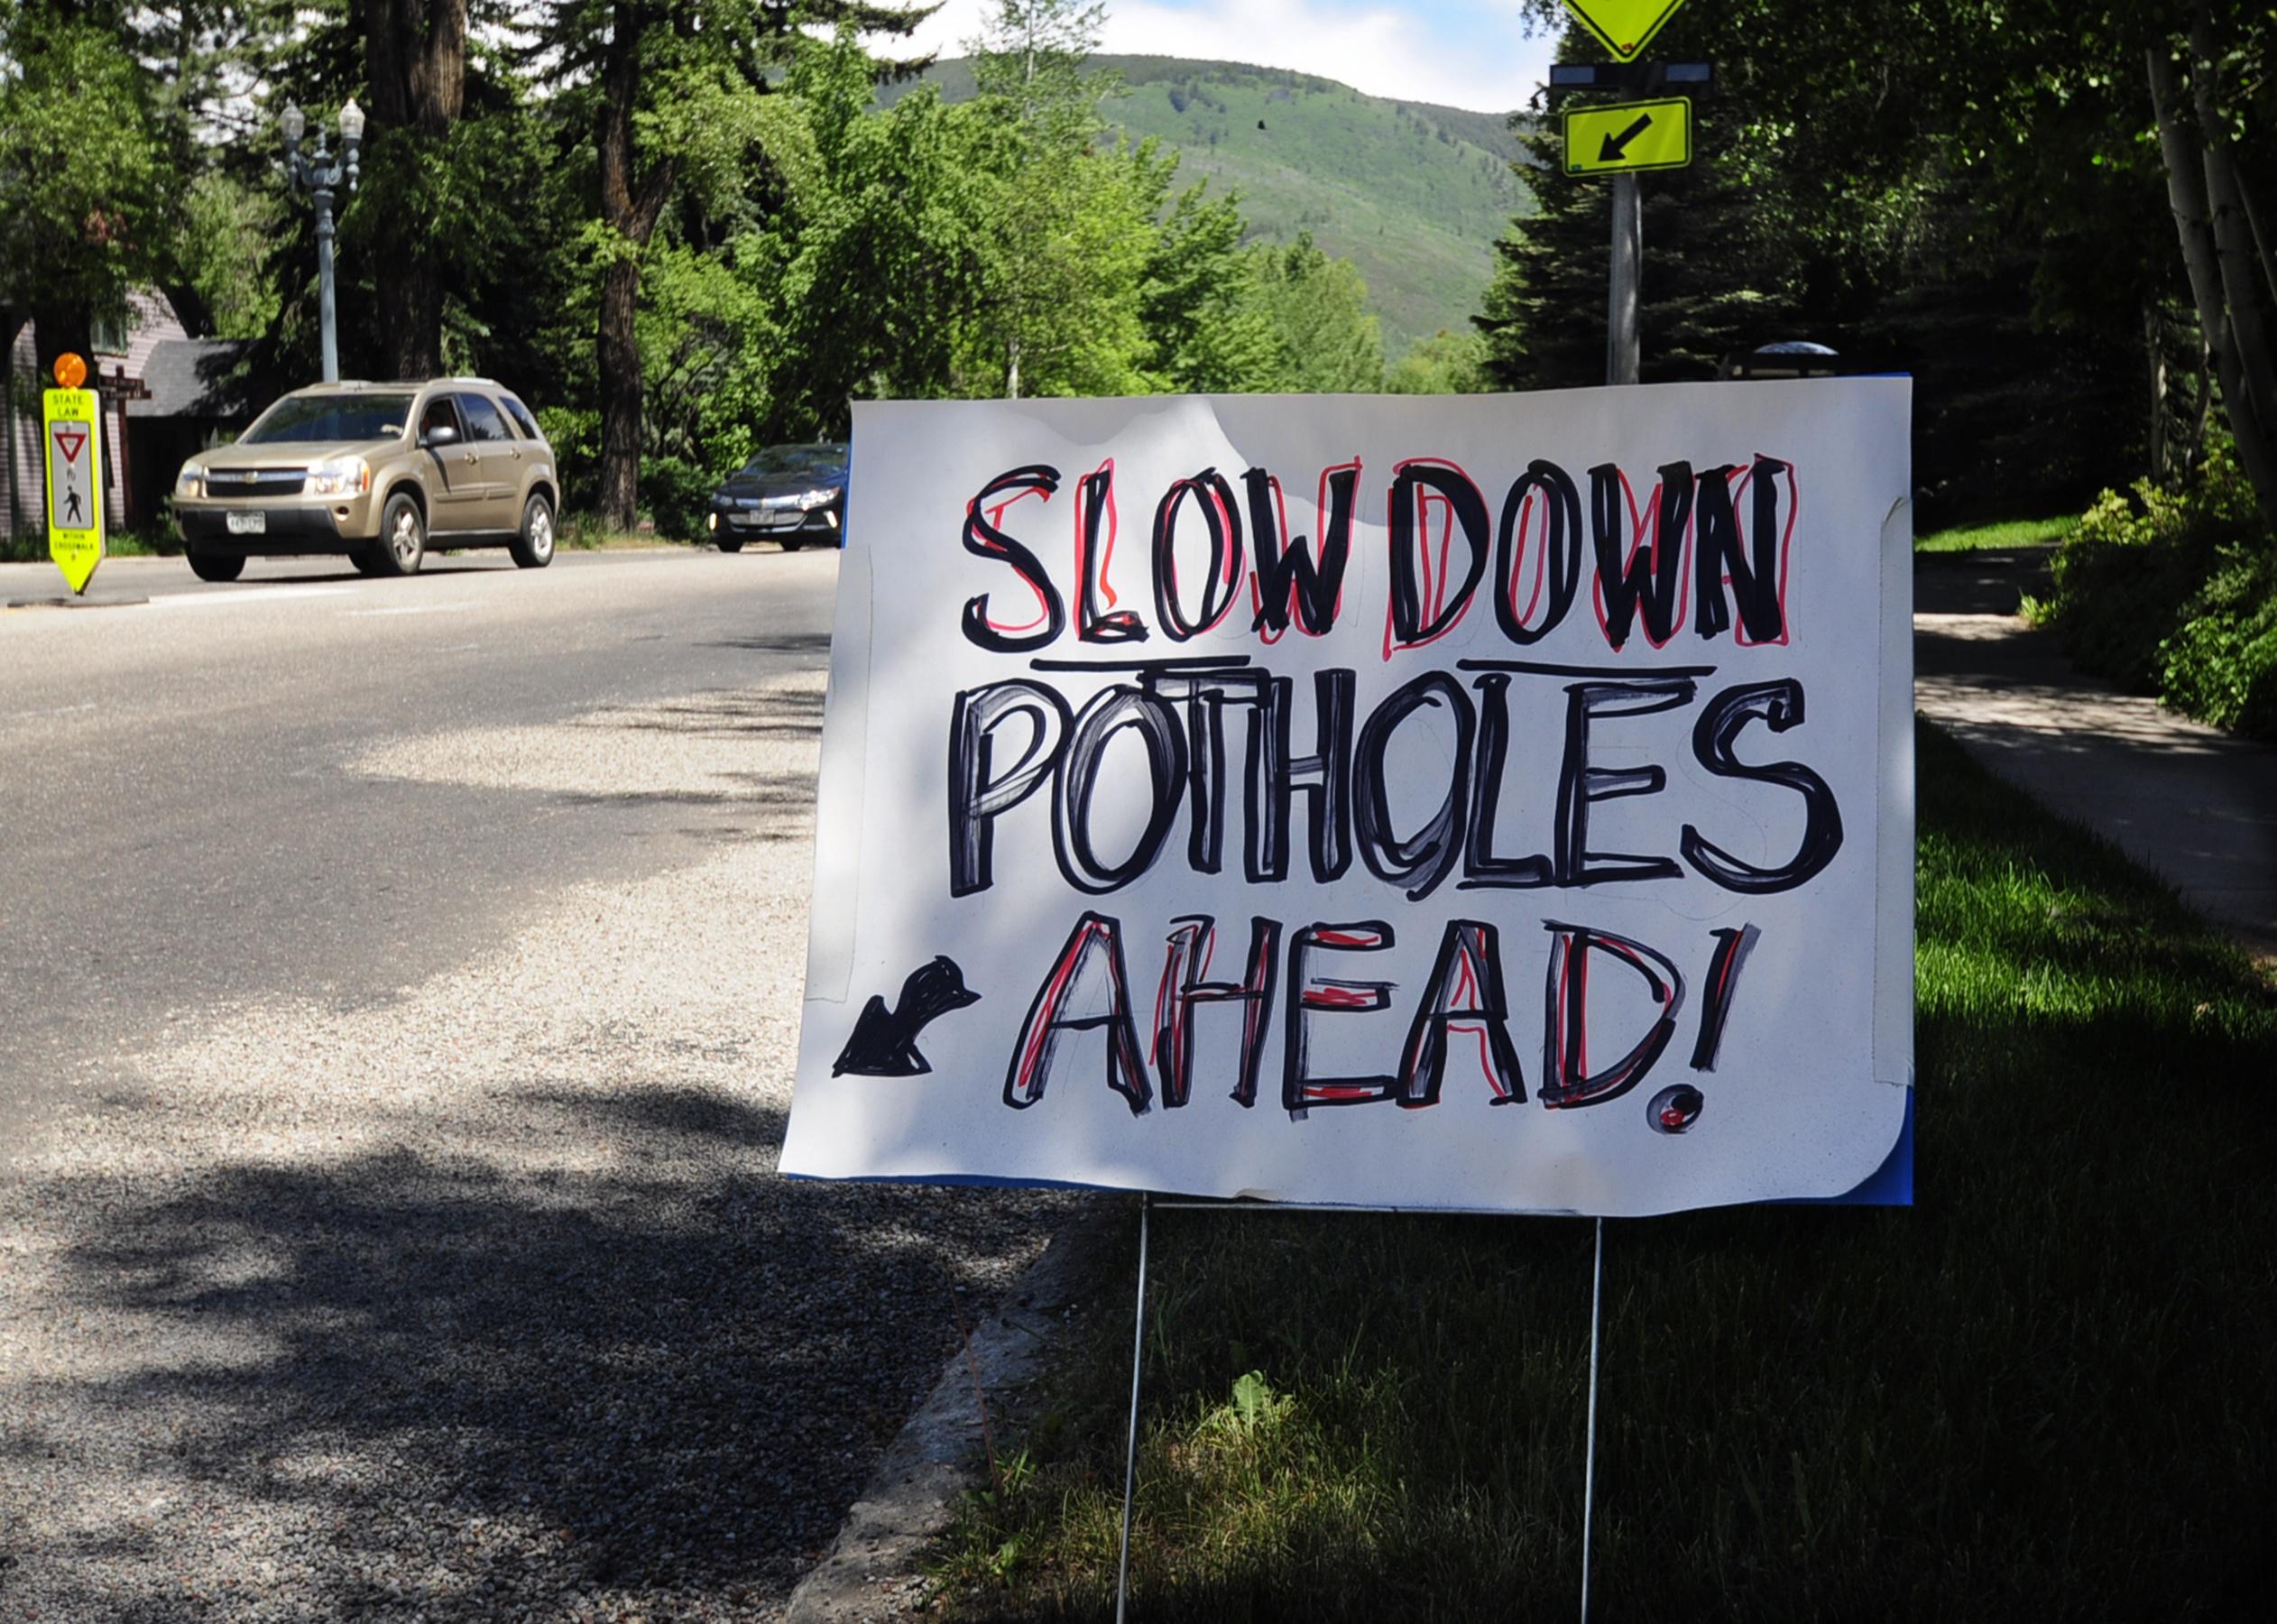 A homemade sign on posterboard warning of potholes in the road.